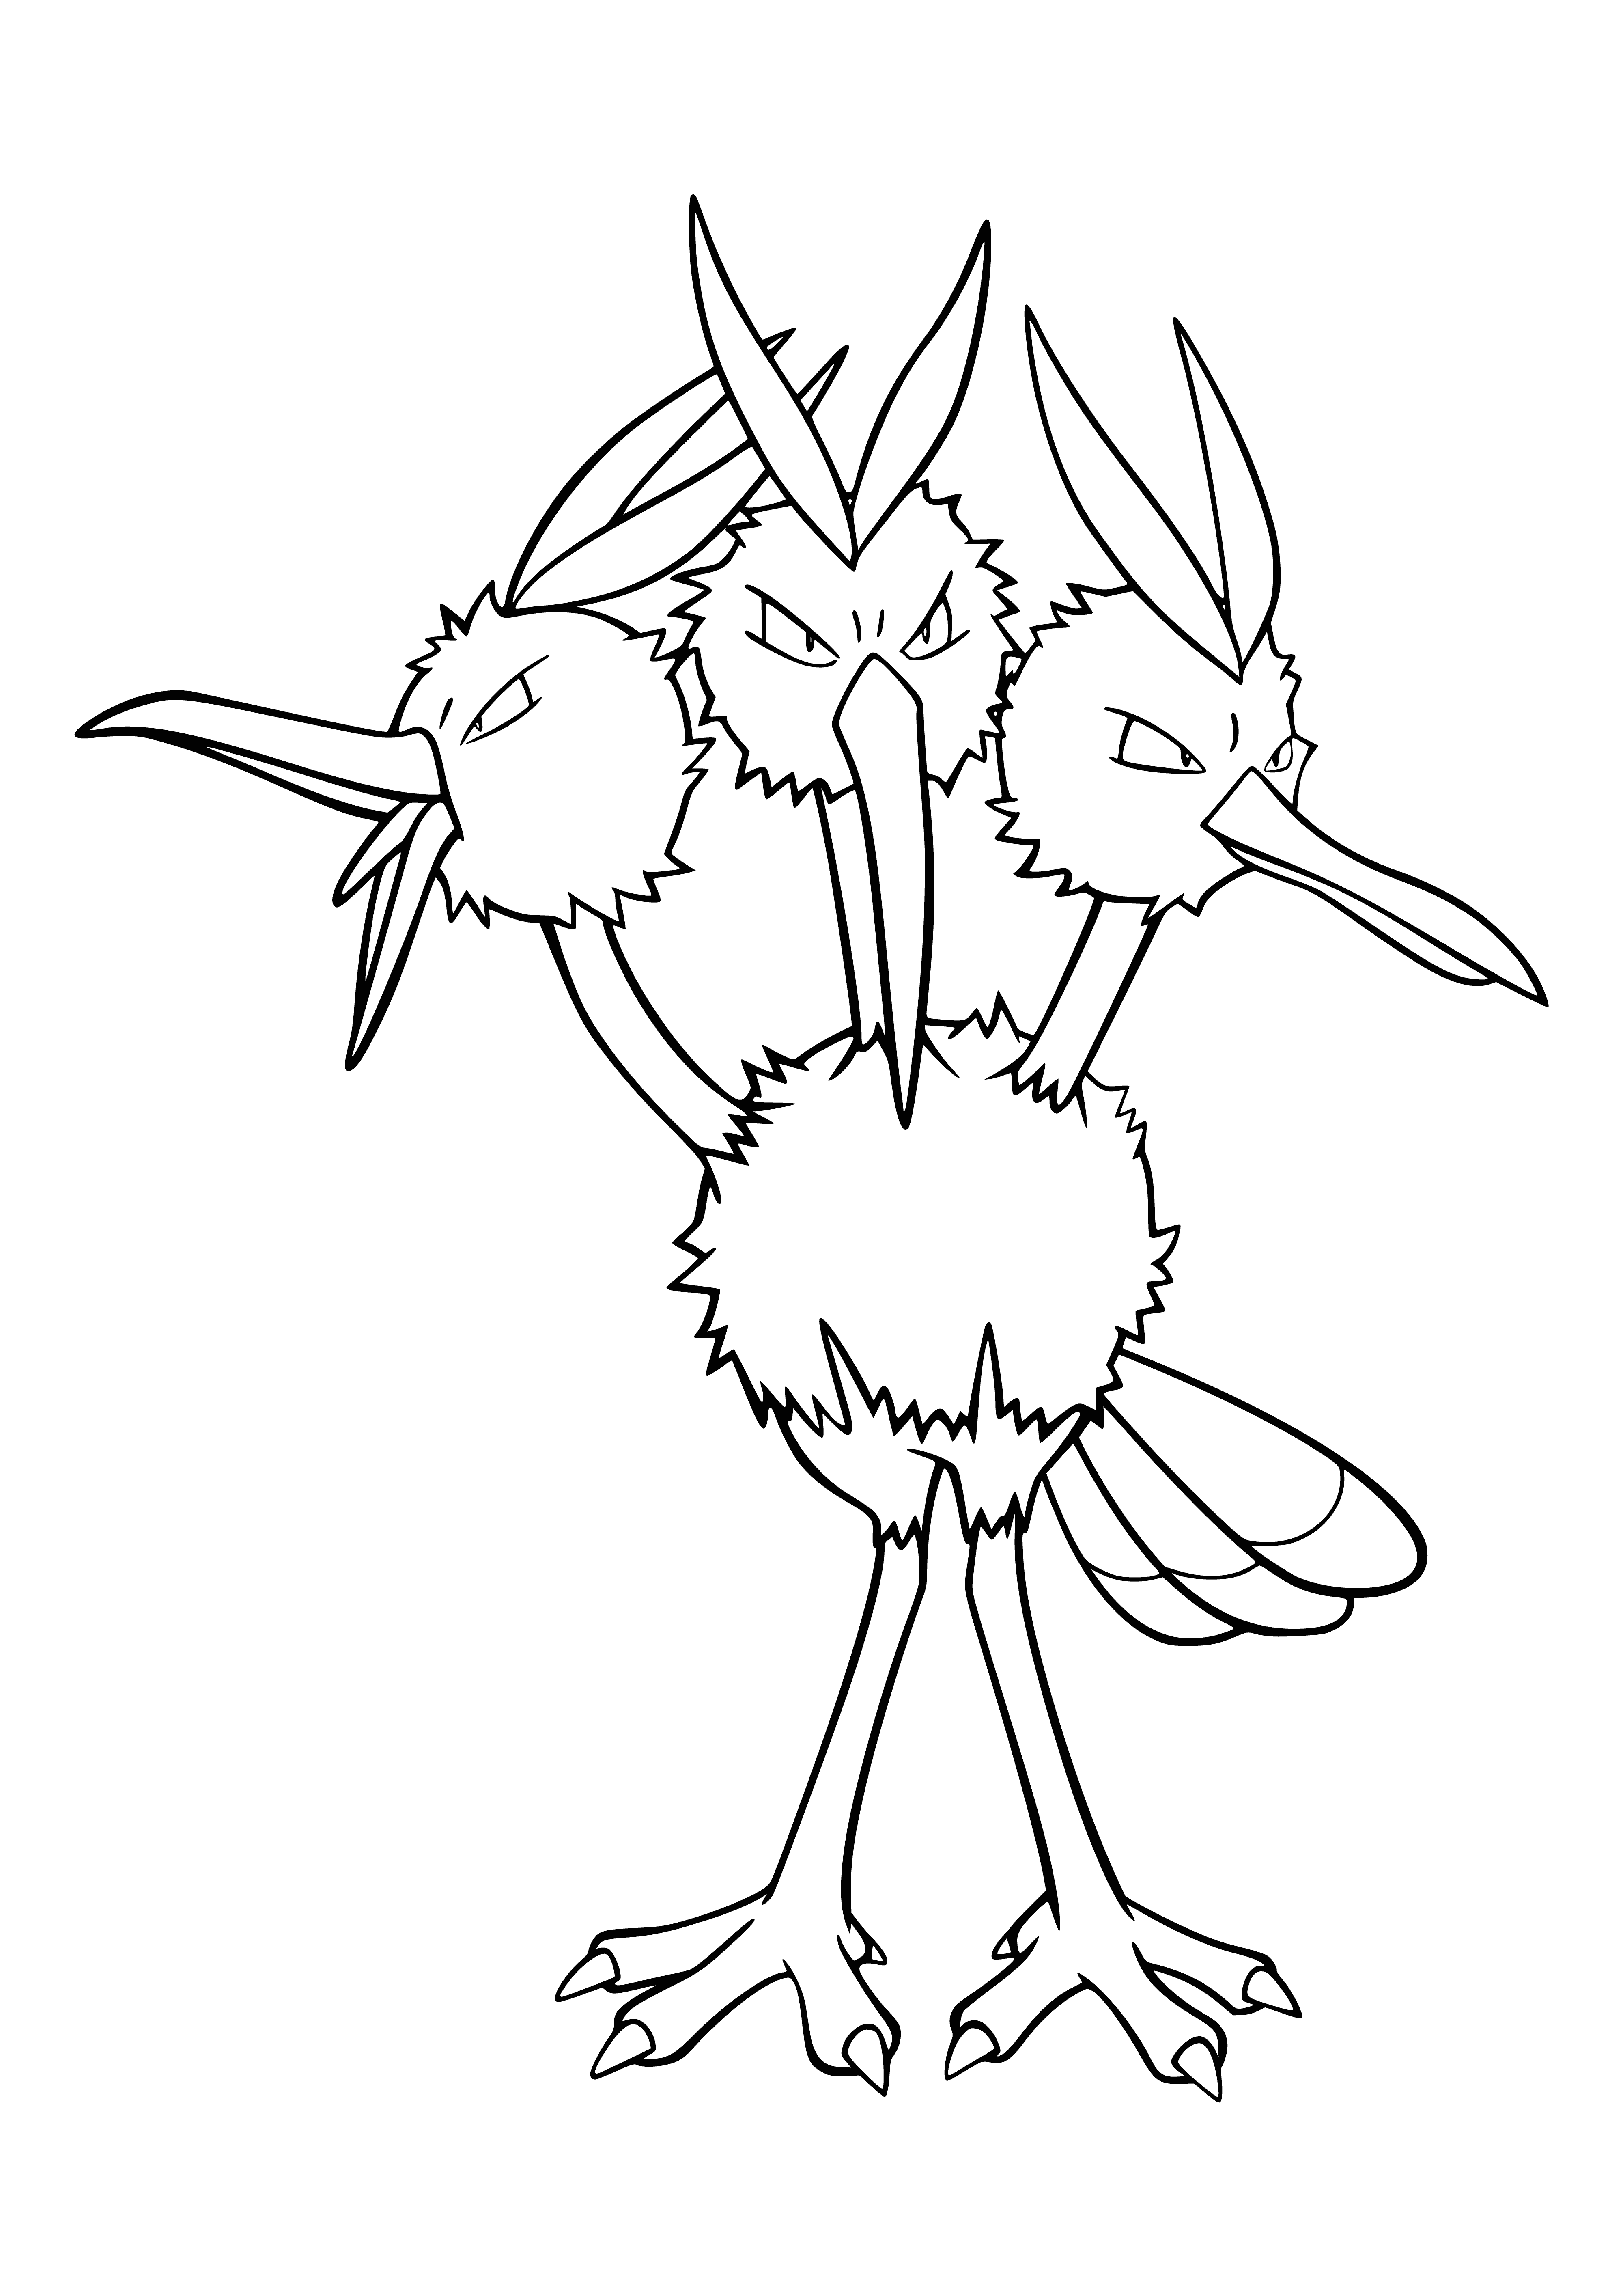 coloring page: Big, blue and white bird Pokémon with three round, red eyes and long, thin beak with white feathers with black tips. Has long, thin legs with three toes on each foot.